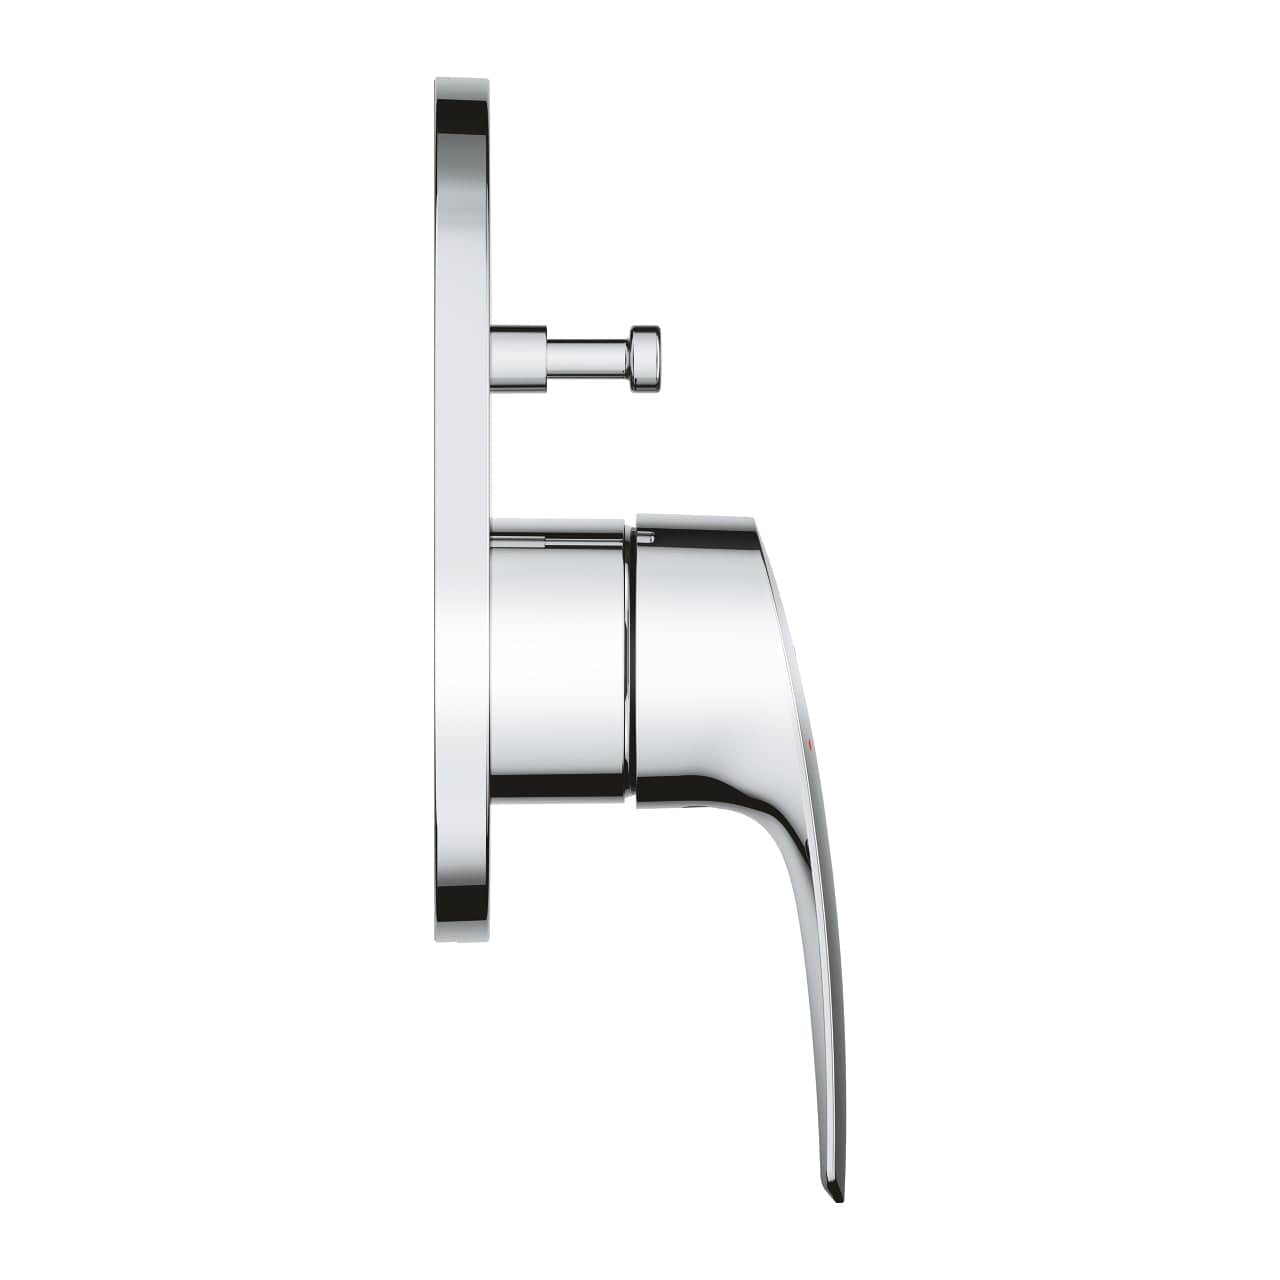 Grohe Eurosmart Single-lever Mixer with 2-way Diverter, Chrome | Supply Master | Accra, Ghana Bathroom Faucet Buy Tools hardware Building materials